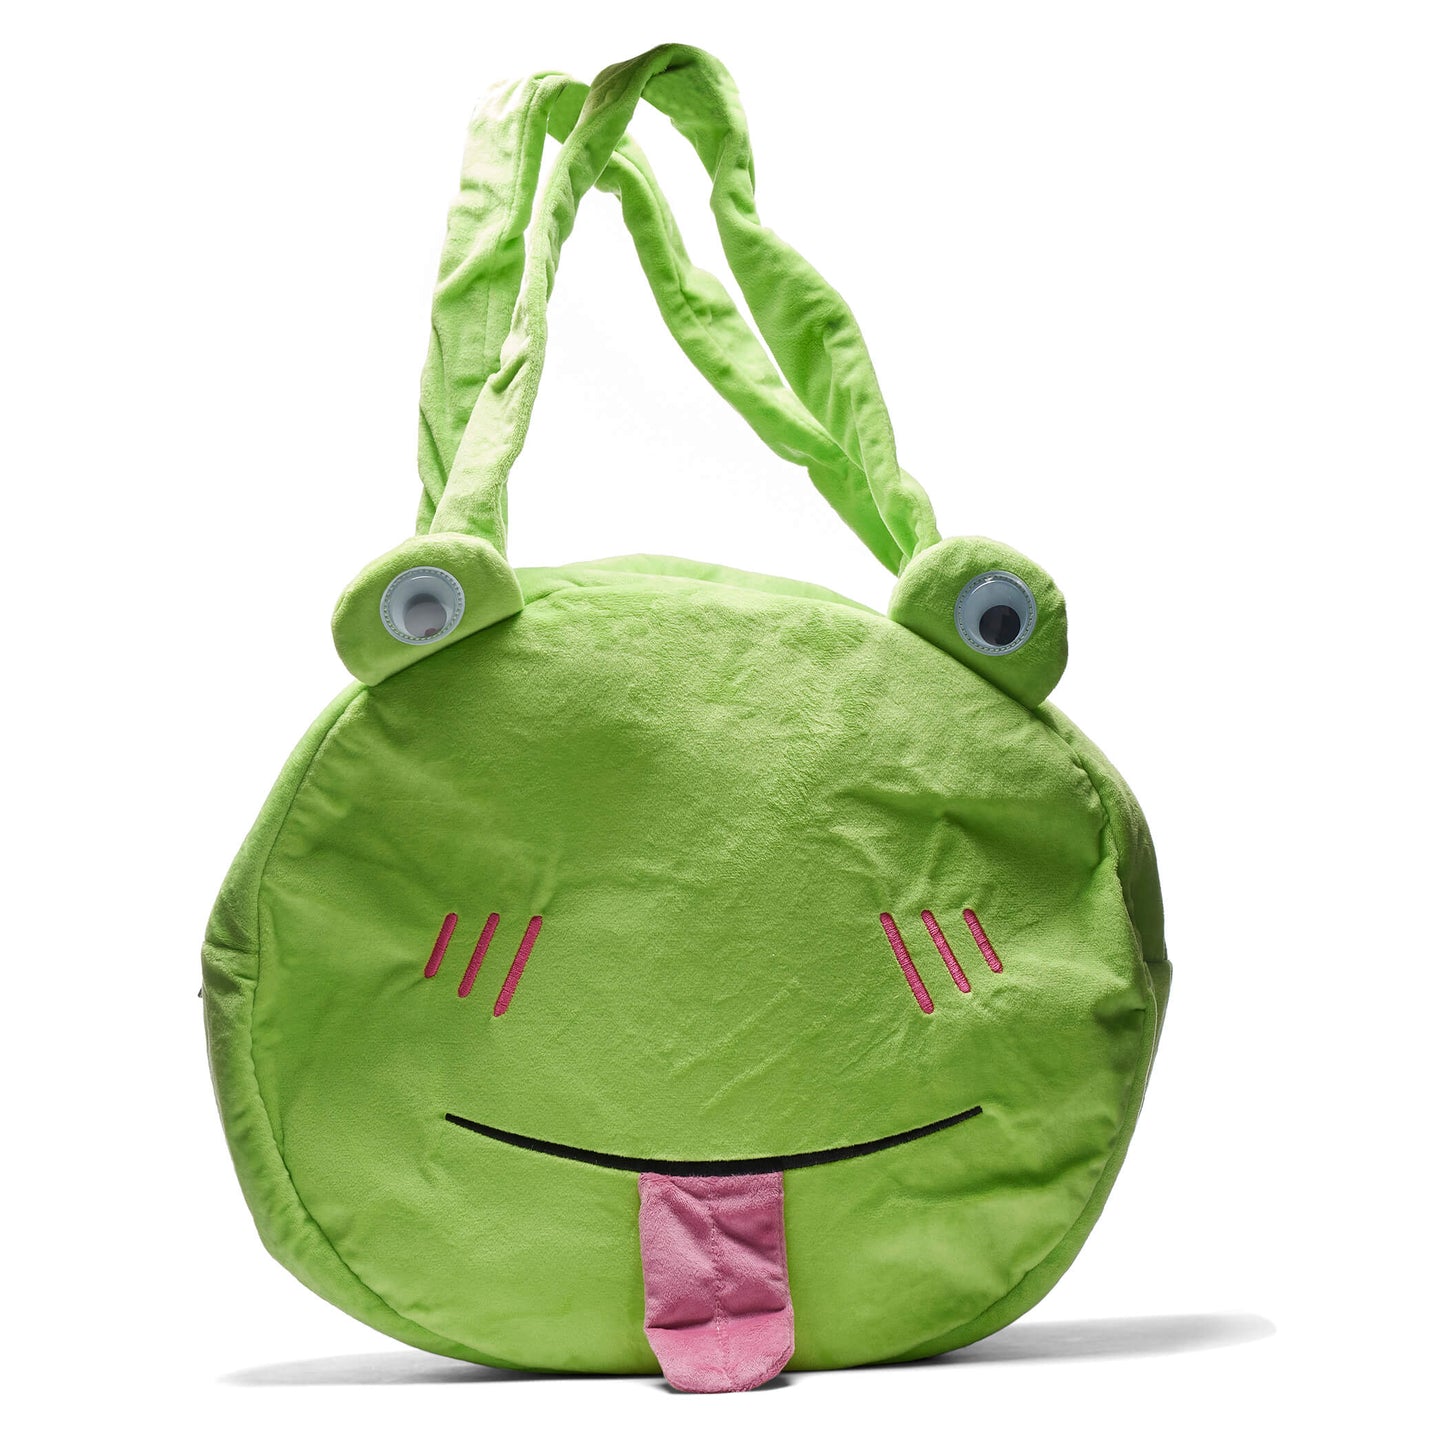 Bevvy the Frog Bag - Accessories - KOI Footwear - Green - Front View